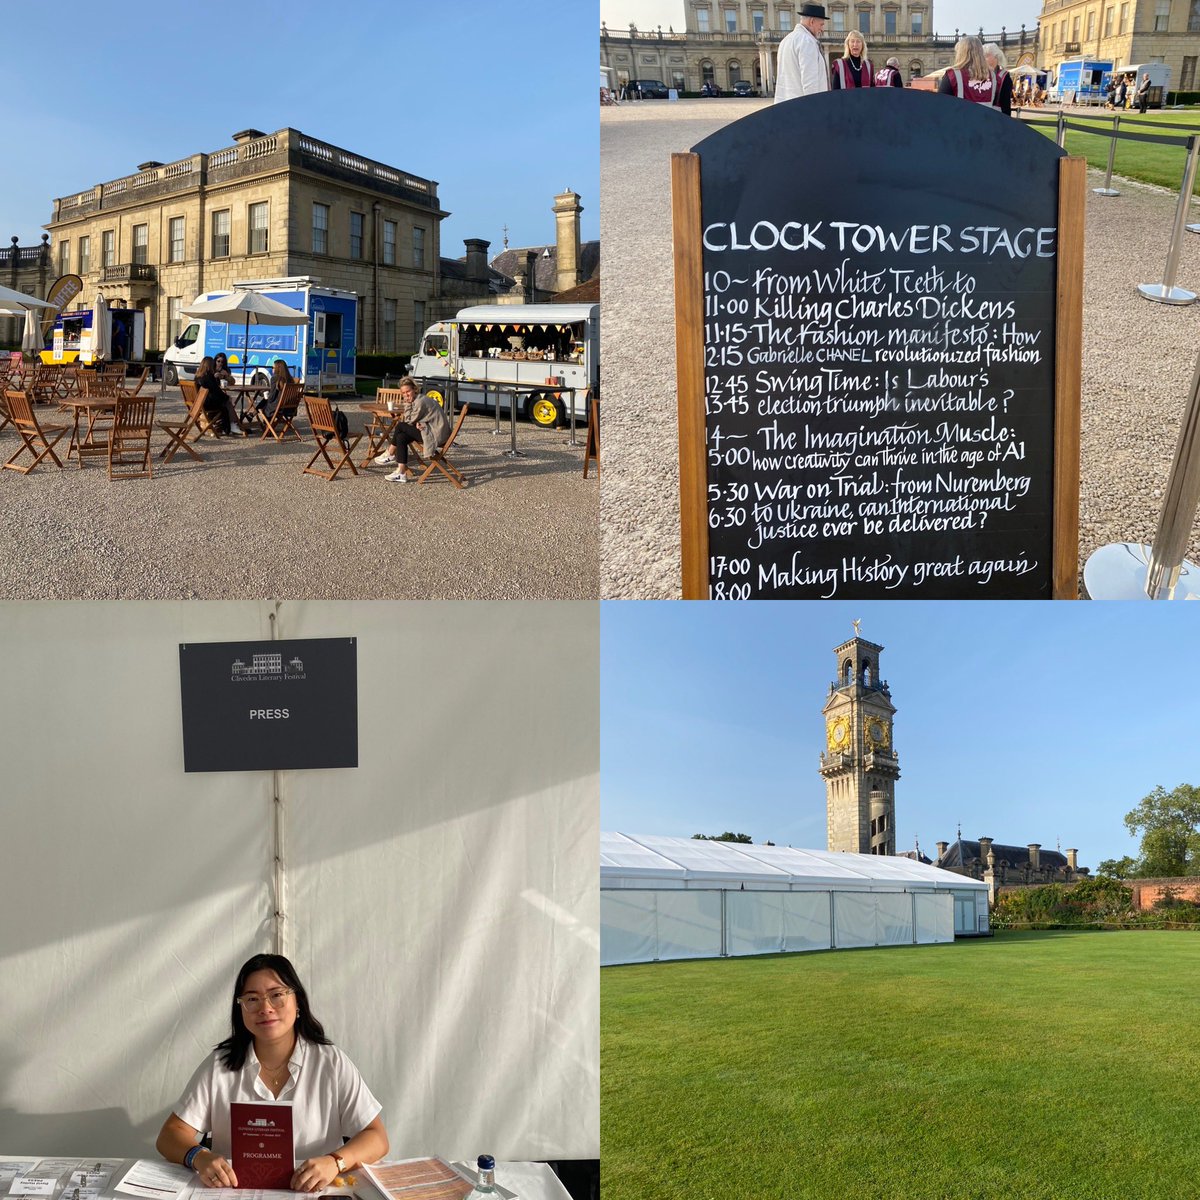 A beautiful morning @clivedenlitfest & the Midas team is ready for a busy day & some amazing events with brilliant authors including Zadie Smith, Maggie O’Farrell, Katherine Rundell, Simon Sebag Montefiore, Phillippe Sands, Emily Maitliss, Mary Beard & more.